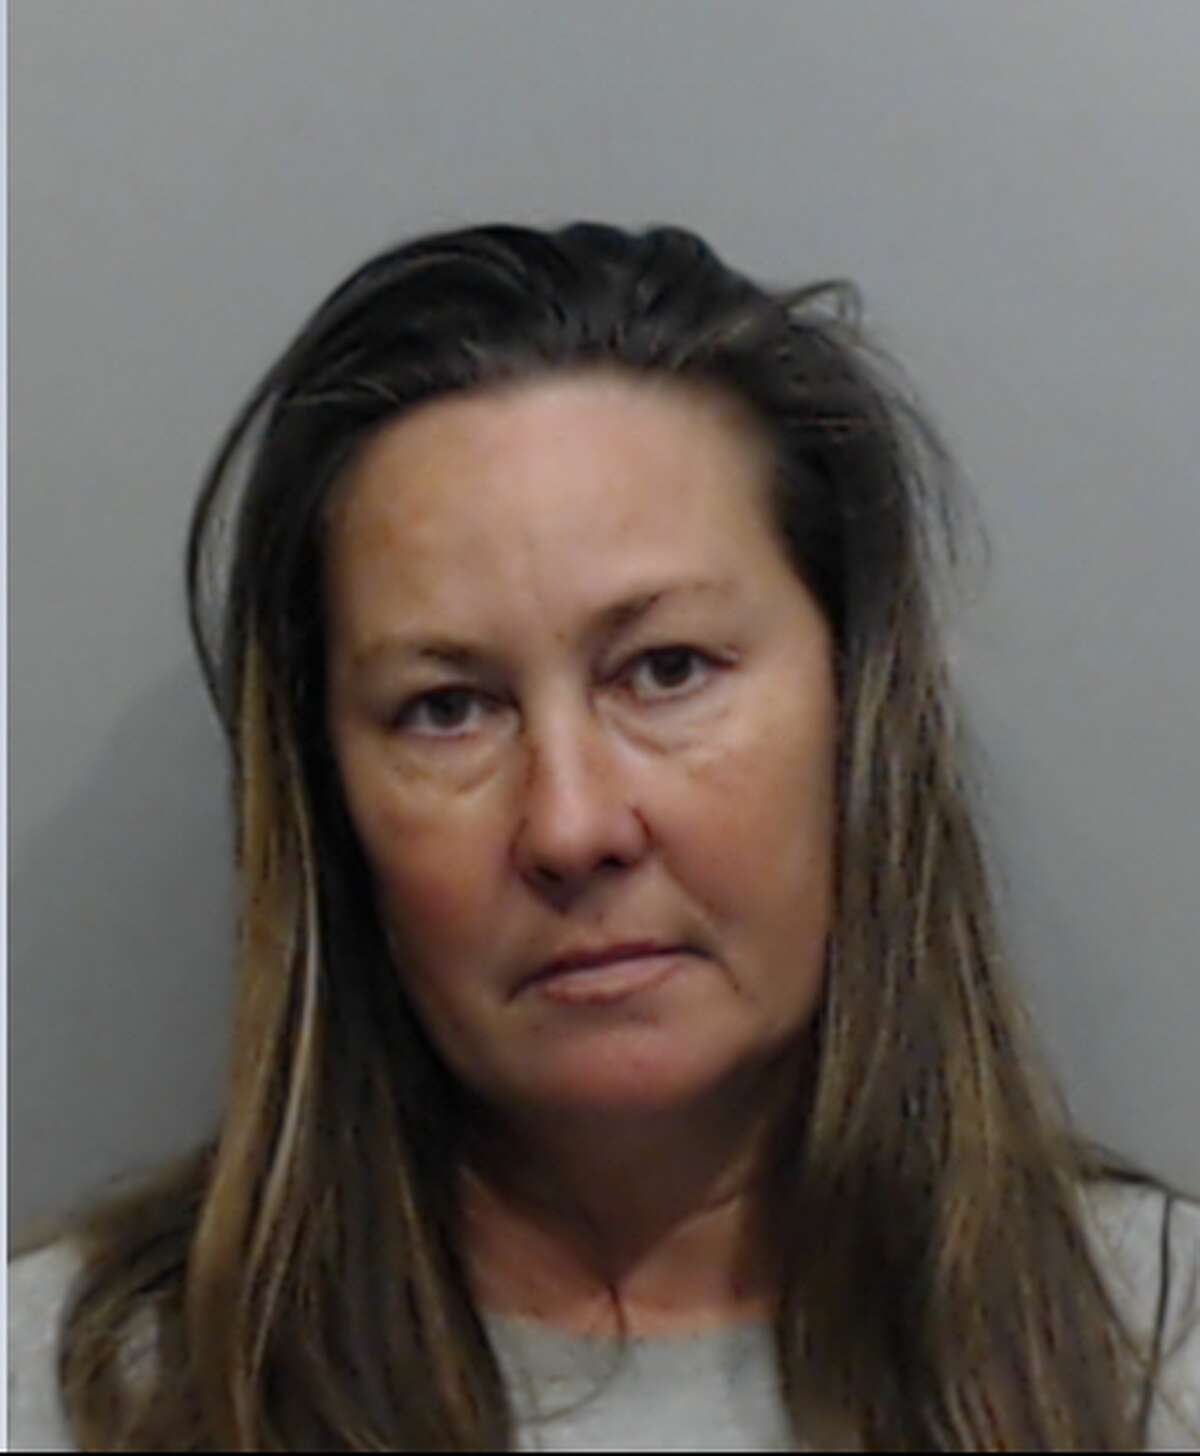 Melissa Caffey, 47, was arrested on 10 counts of animal cruelty charges in December 2018 after Hays County deputies discovered more than 150 cats and more than a dozen dogs living in inhumane conditions at her Buda home. Four cats were found dead and several others are seriously ill, the sheriff's office reported. Read the full story here.